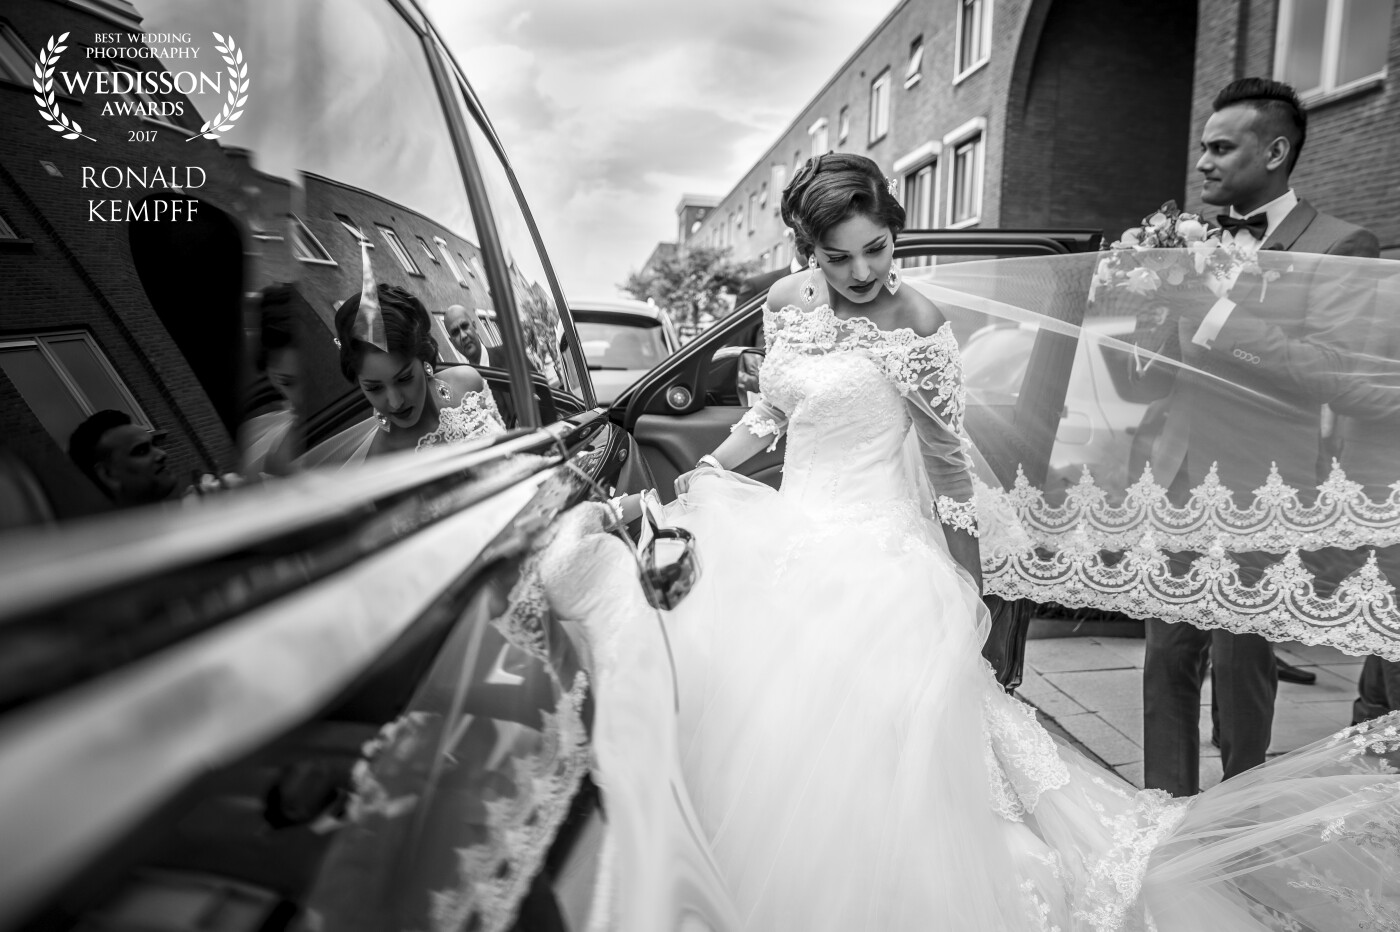 The picture was taken in front of the bride's house. At the moment she walked to the car, I saw her reflection in the car and knew that it would be a nice picture. At this moment she was preparing to get in the car, while the groom was waiting for her to get in.